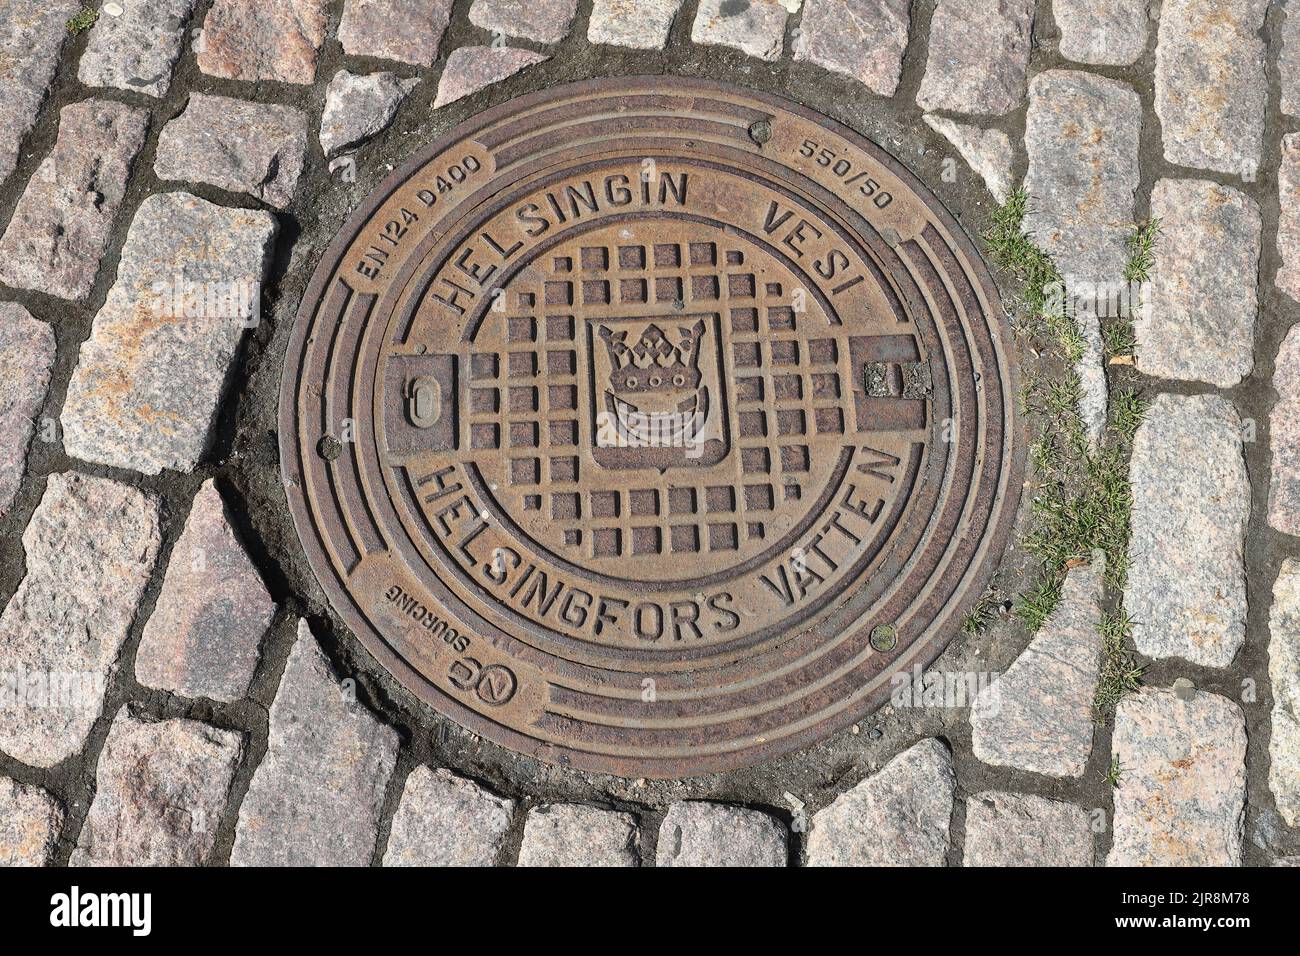 Helsinki, Finland - August 20, 2022: High angle view of a water pipe manhole with Helsinki city coat of arms. Stock Photo